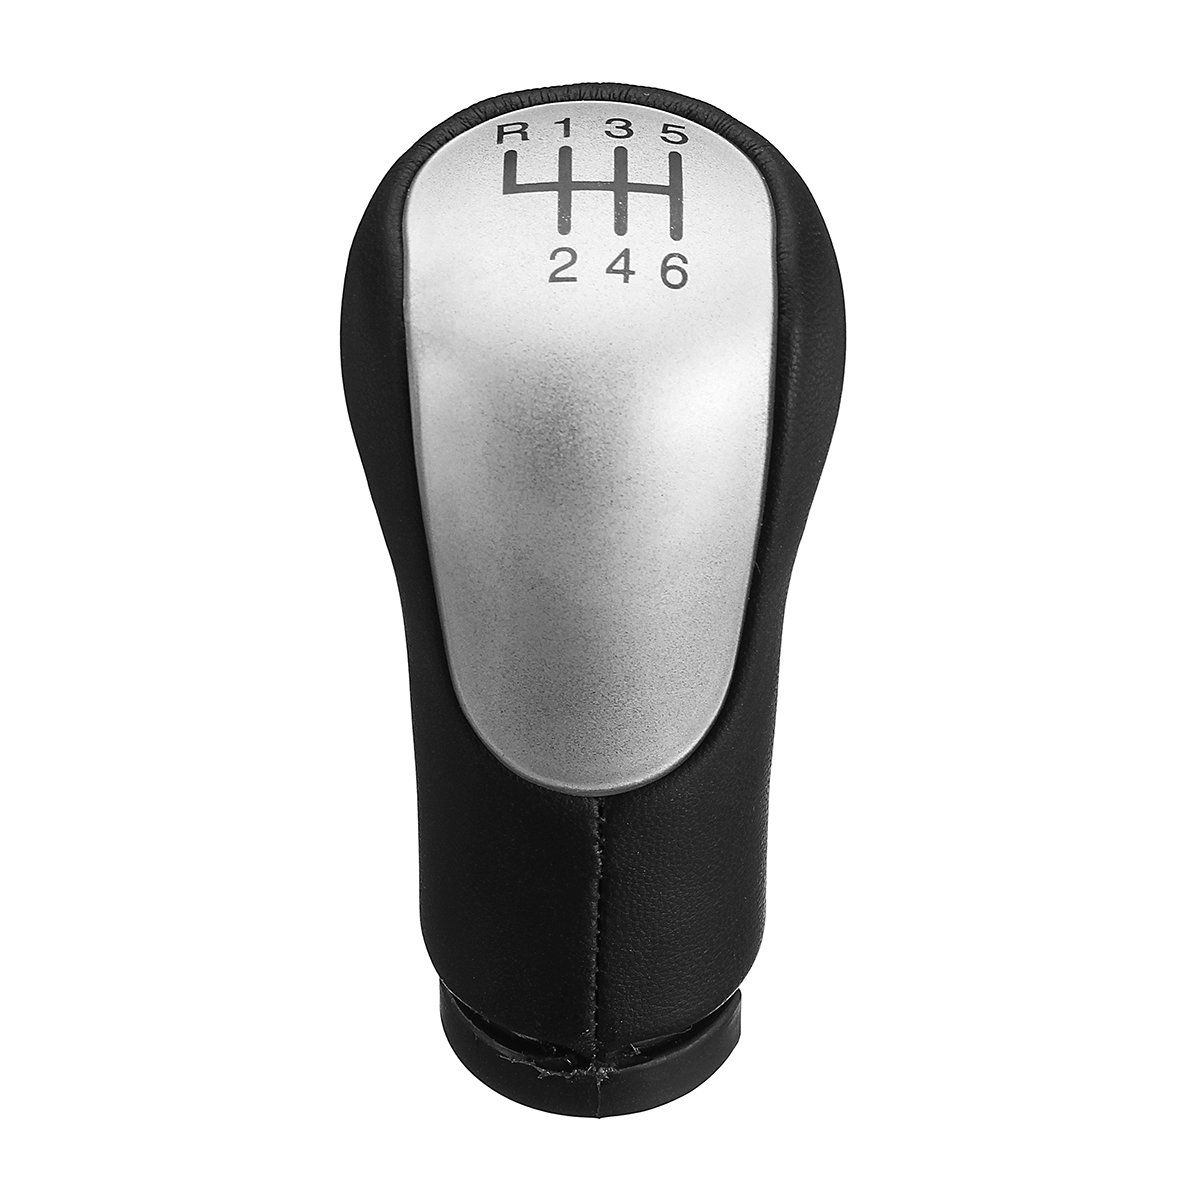 6 Speed Gear Shift Knob Stick for Ford Fiesta Fusion Transit Connect 2002 - Auto GoShop